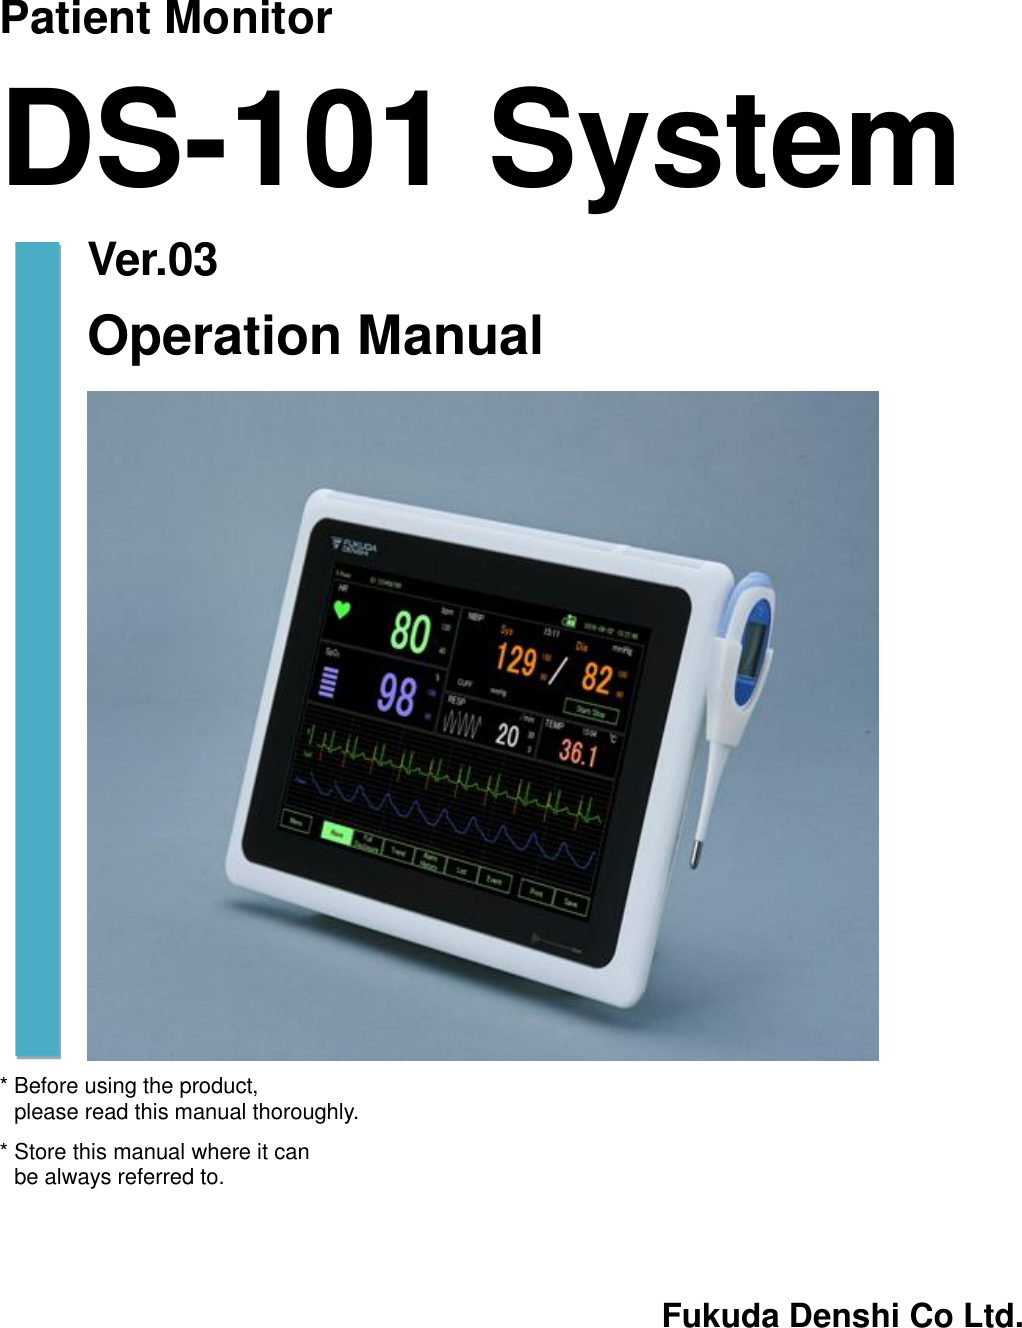 Patient Monitor DS-101 System  Ver.03  Operation Manual  * Before using the product,       please read this manual thoroughly. * Store this manual where it can be always referred to.   Fukuda Denshi Co Ltd. 